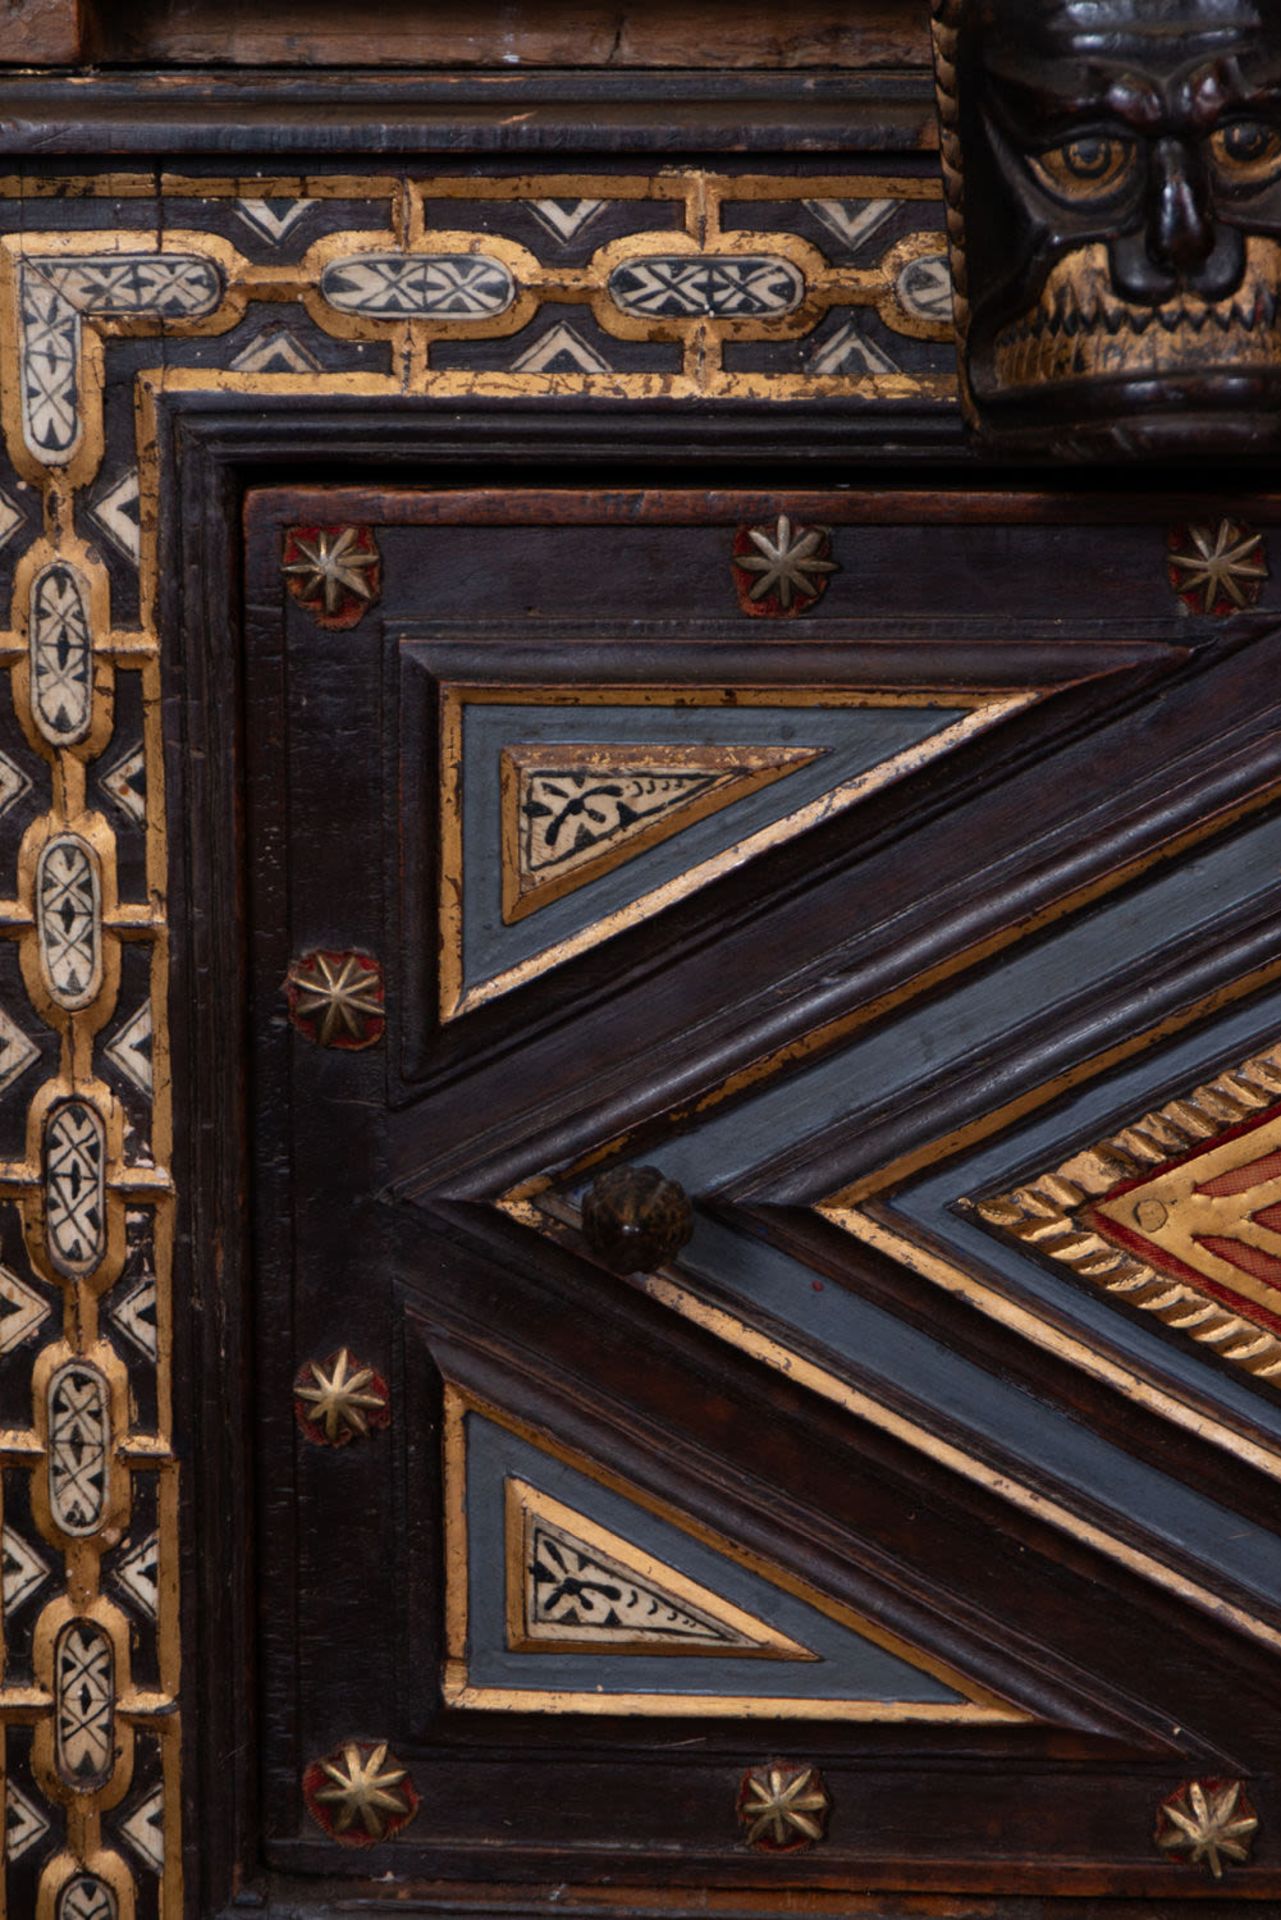 Exceptional Spanish Vargueno Cabinet complete with table, Toledo school of the 17th century - Image 22 of 26